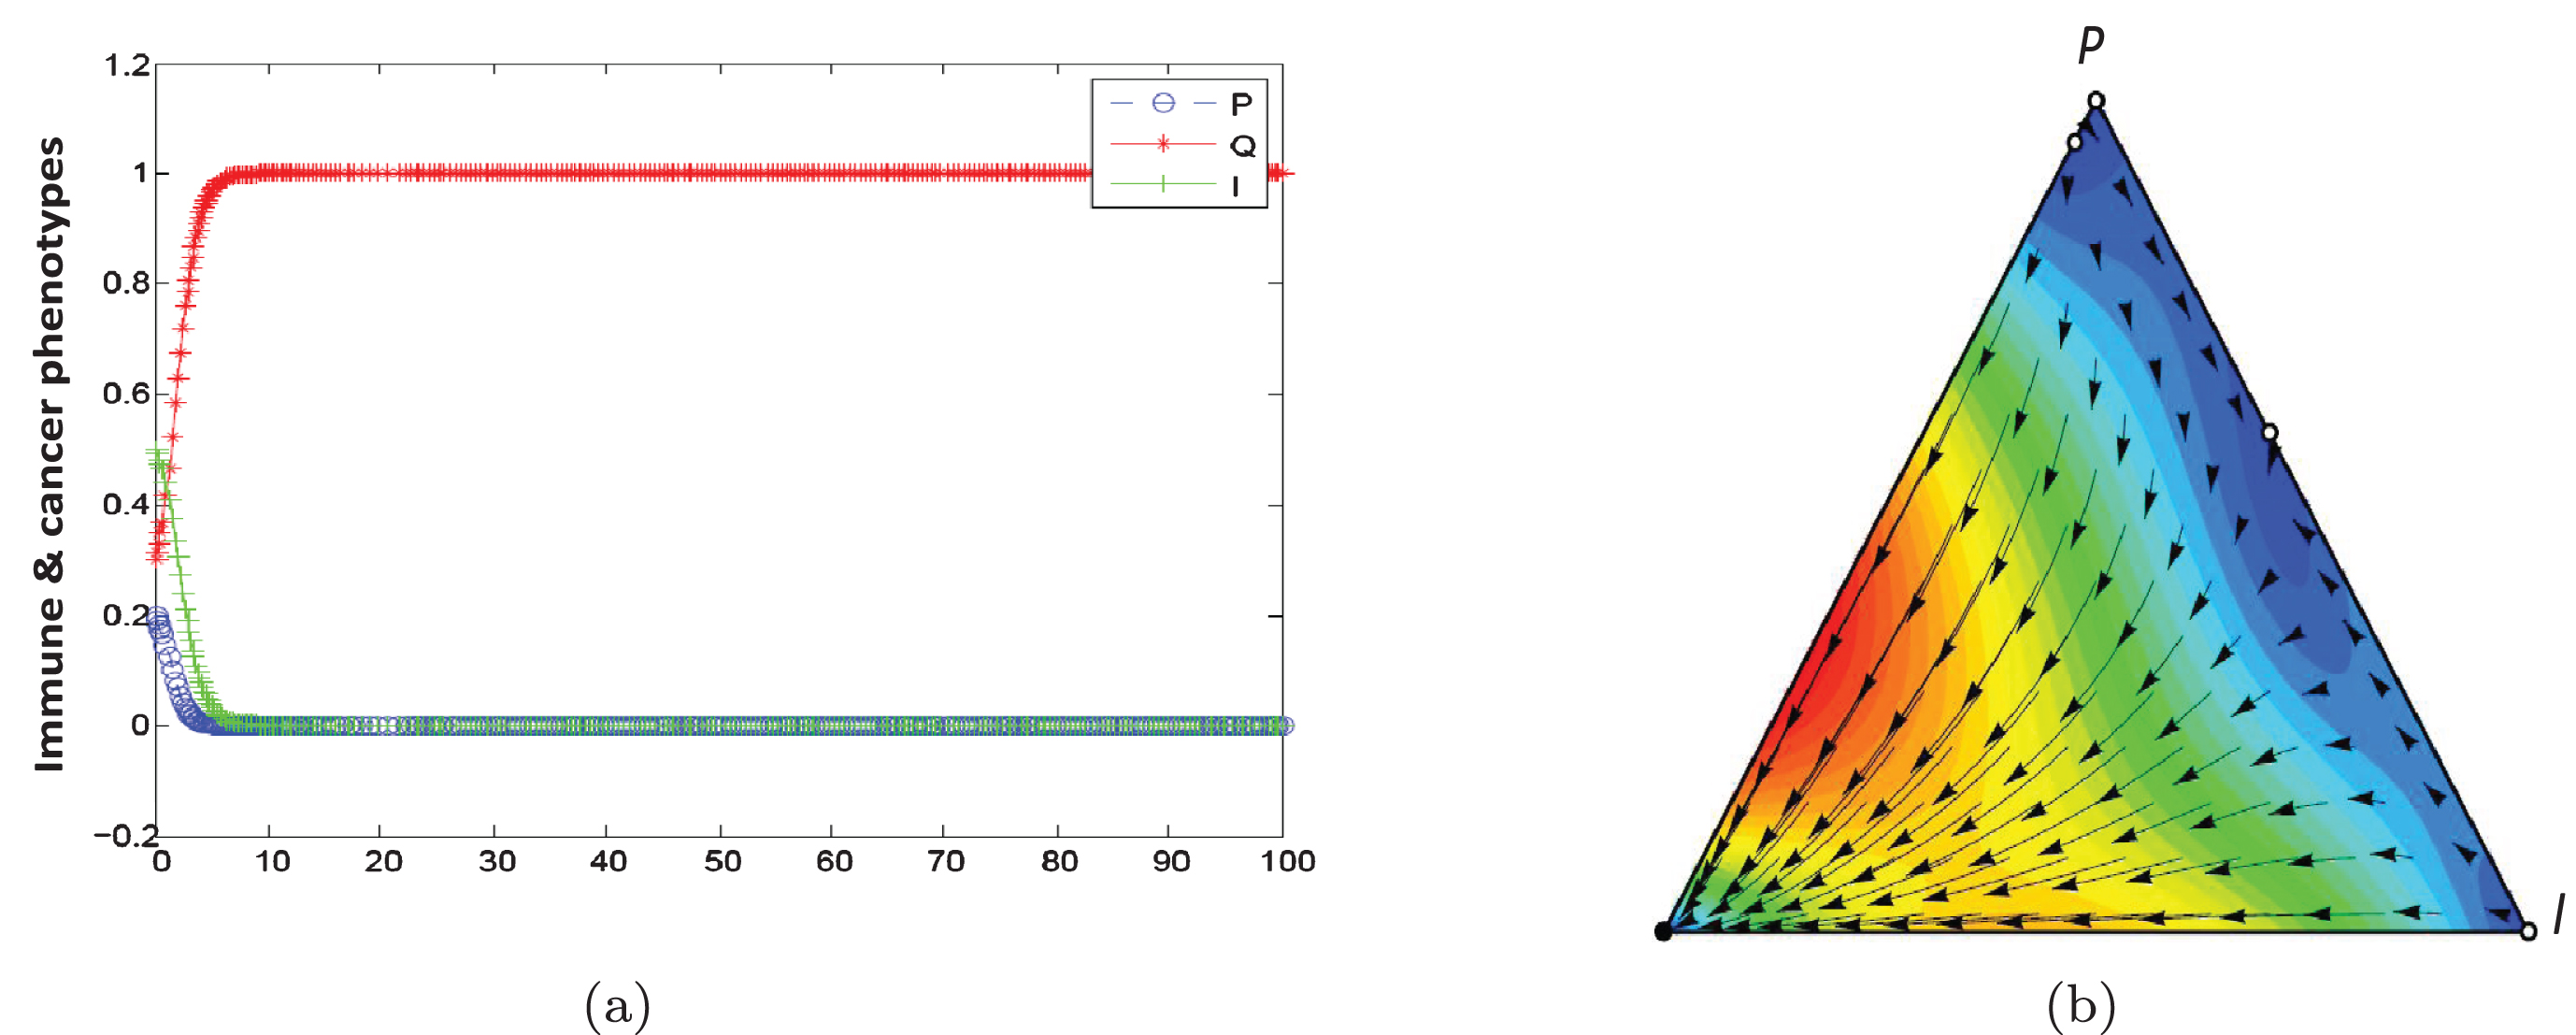 Population dynamic in the equilibrium phase.The parameters characterising this game are a, b = 1, α = 0.1, β = 0.9, F2 = 1.5, F1 = 0.5, γ2 = 0, γ1 = 0.2, C2 = 0, C1 = 0.2 .